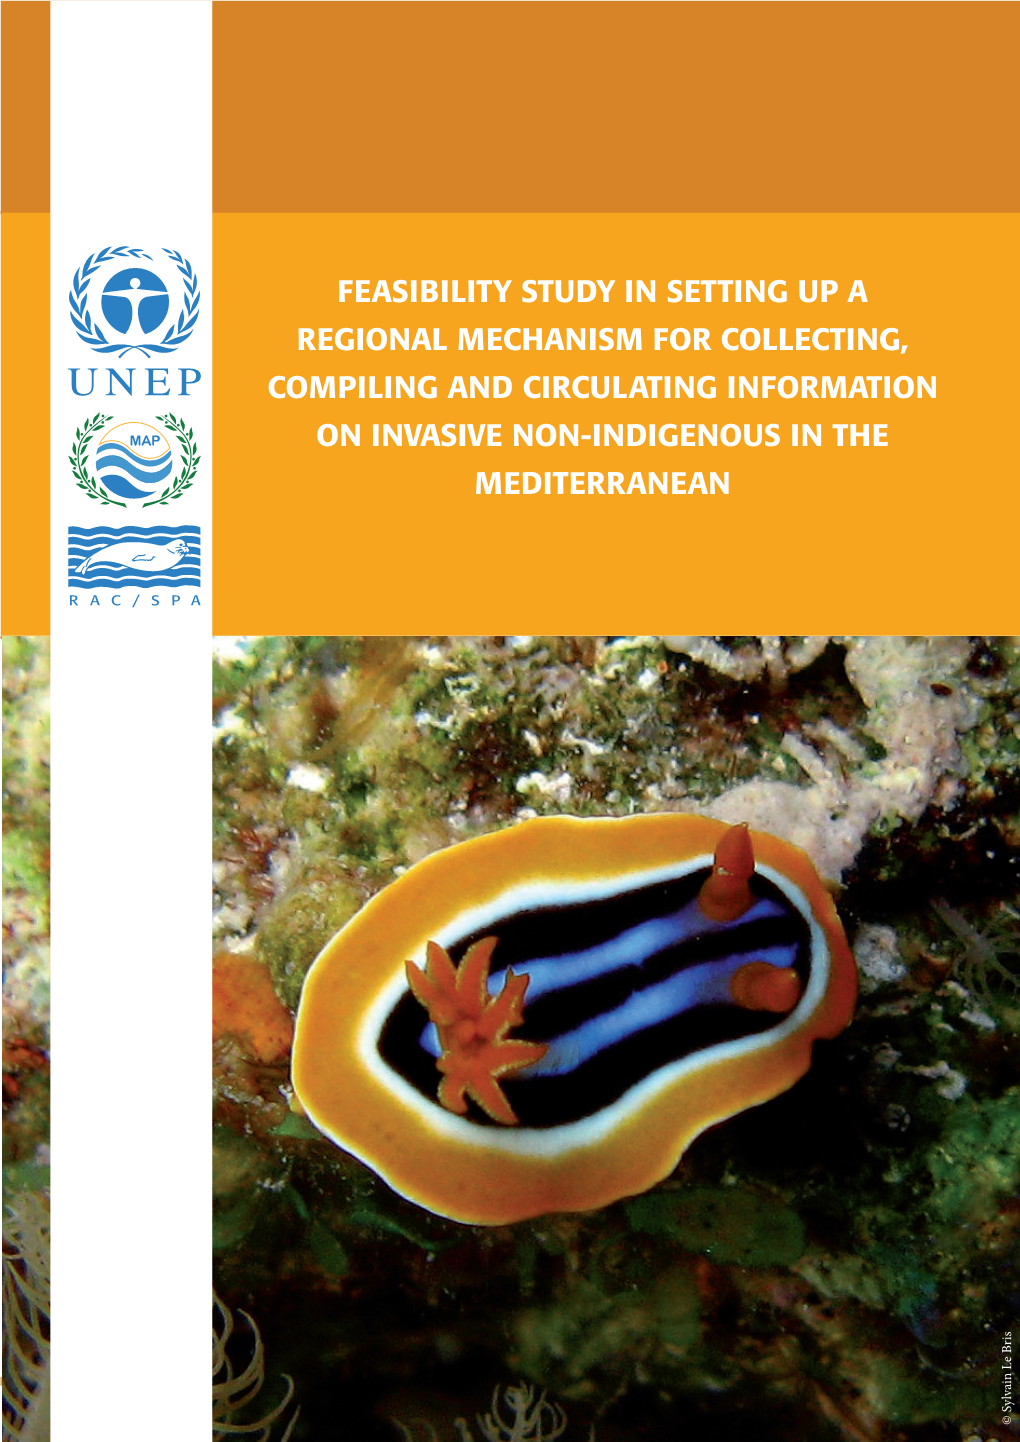 Feasibility Study in Setting up a Regional Mechanism for Collecting, Compiling and Circulating Information on Invasive Non-Indigenous in the Mediterranean